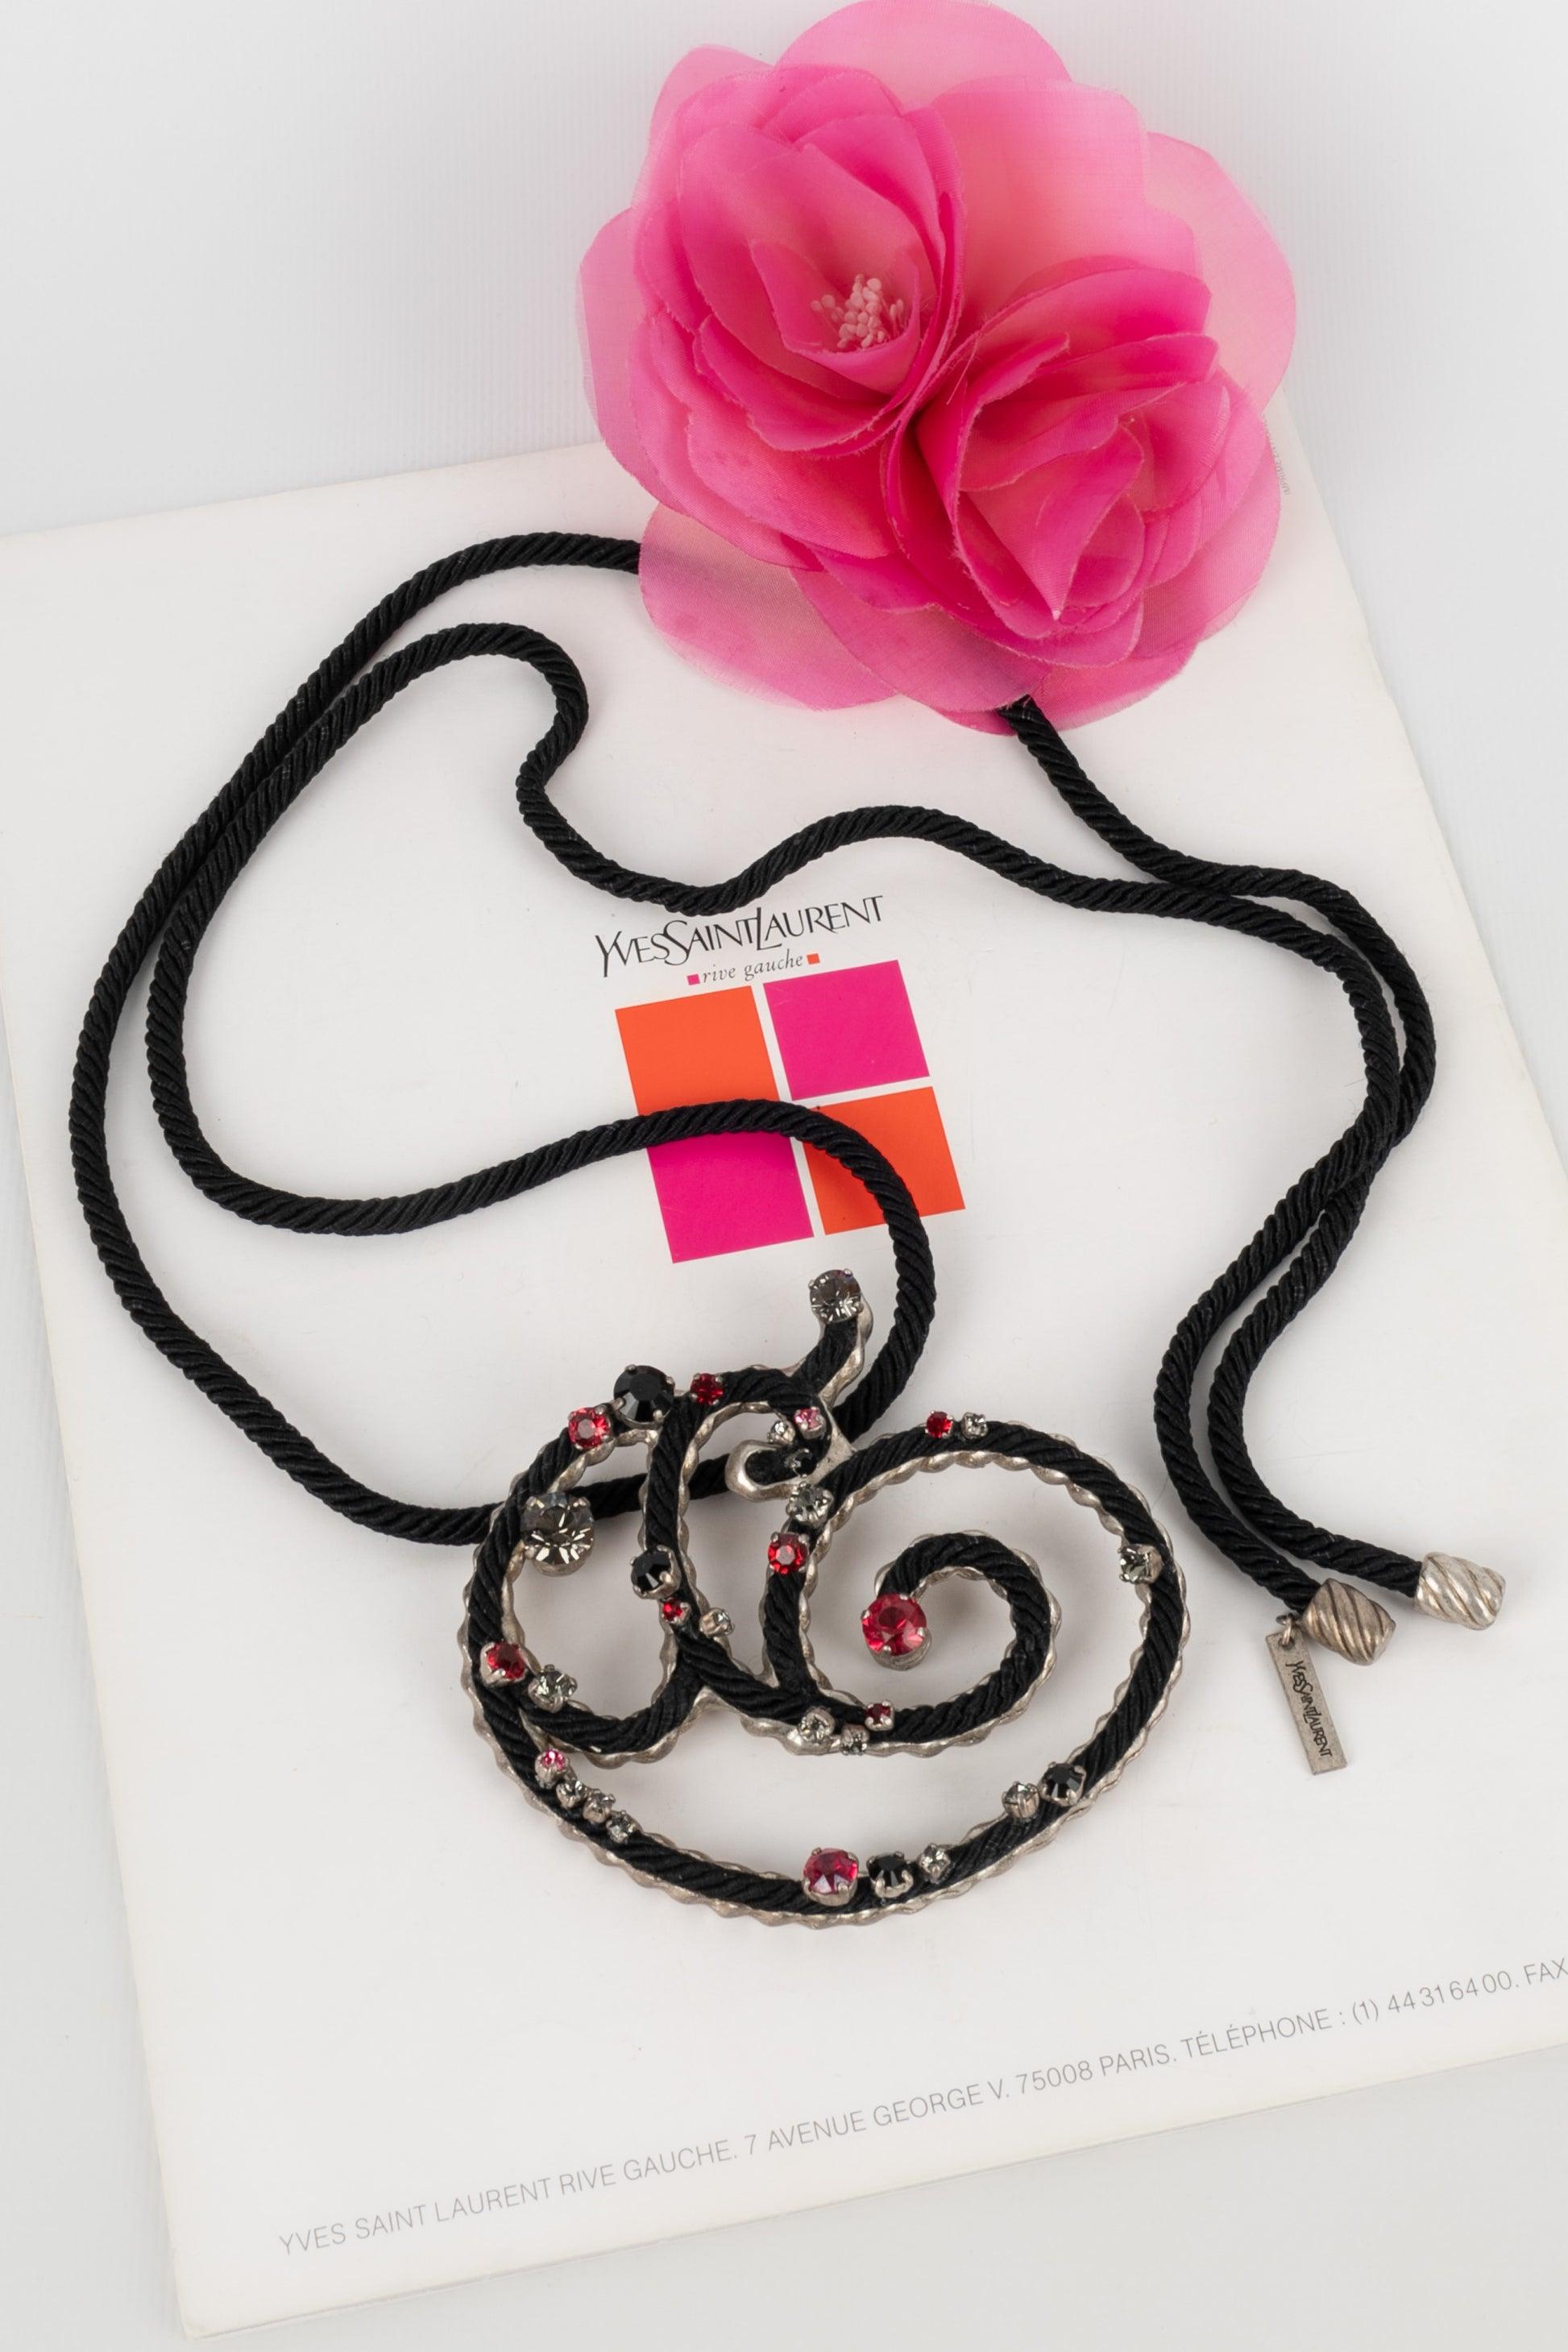 Yves Saint Laurent Necklace with a Black Trimmings For Sale 5